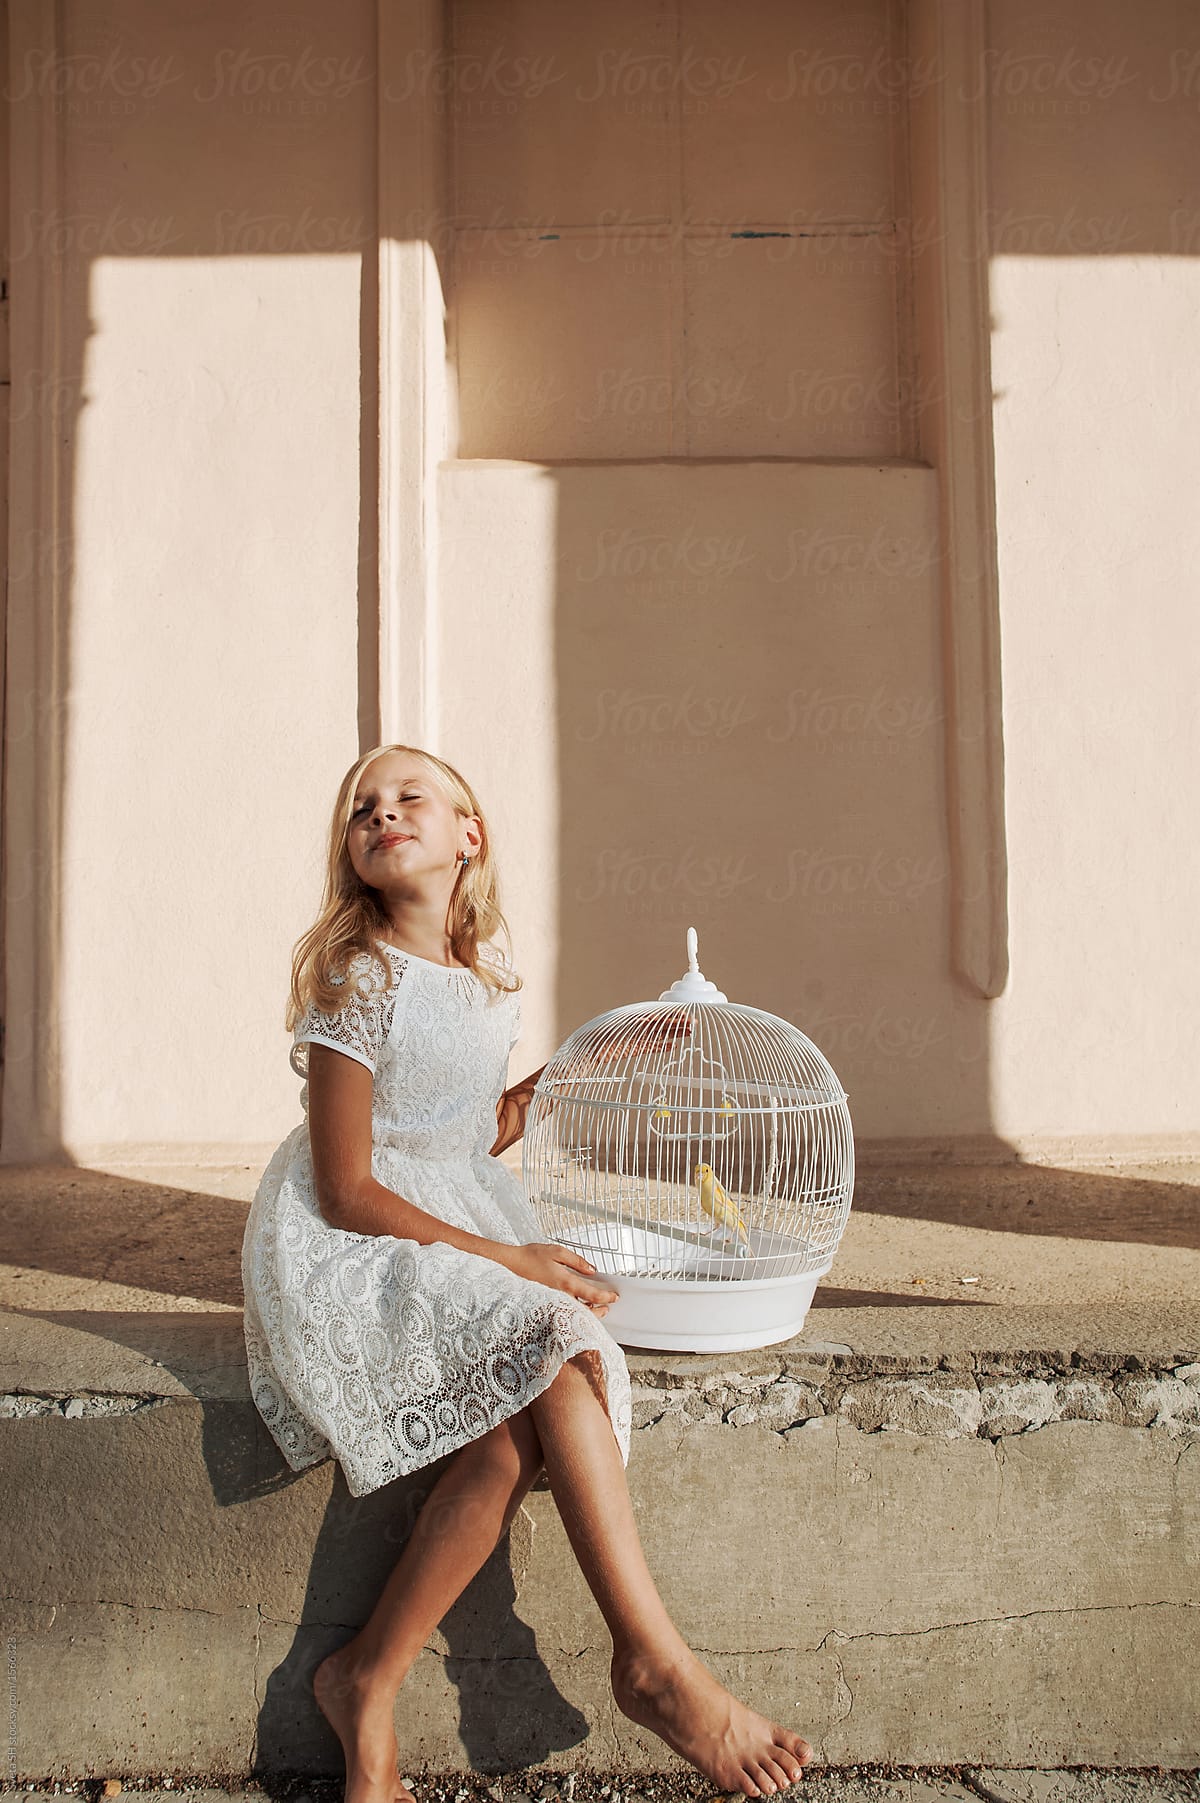 Girl with a cage for birds